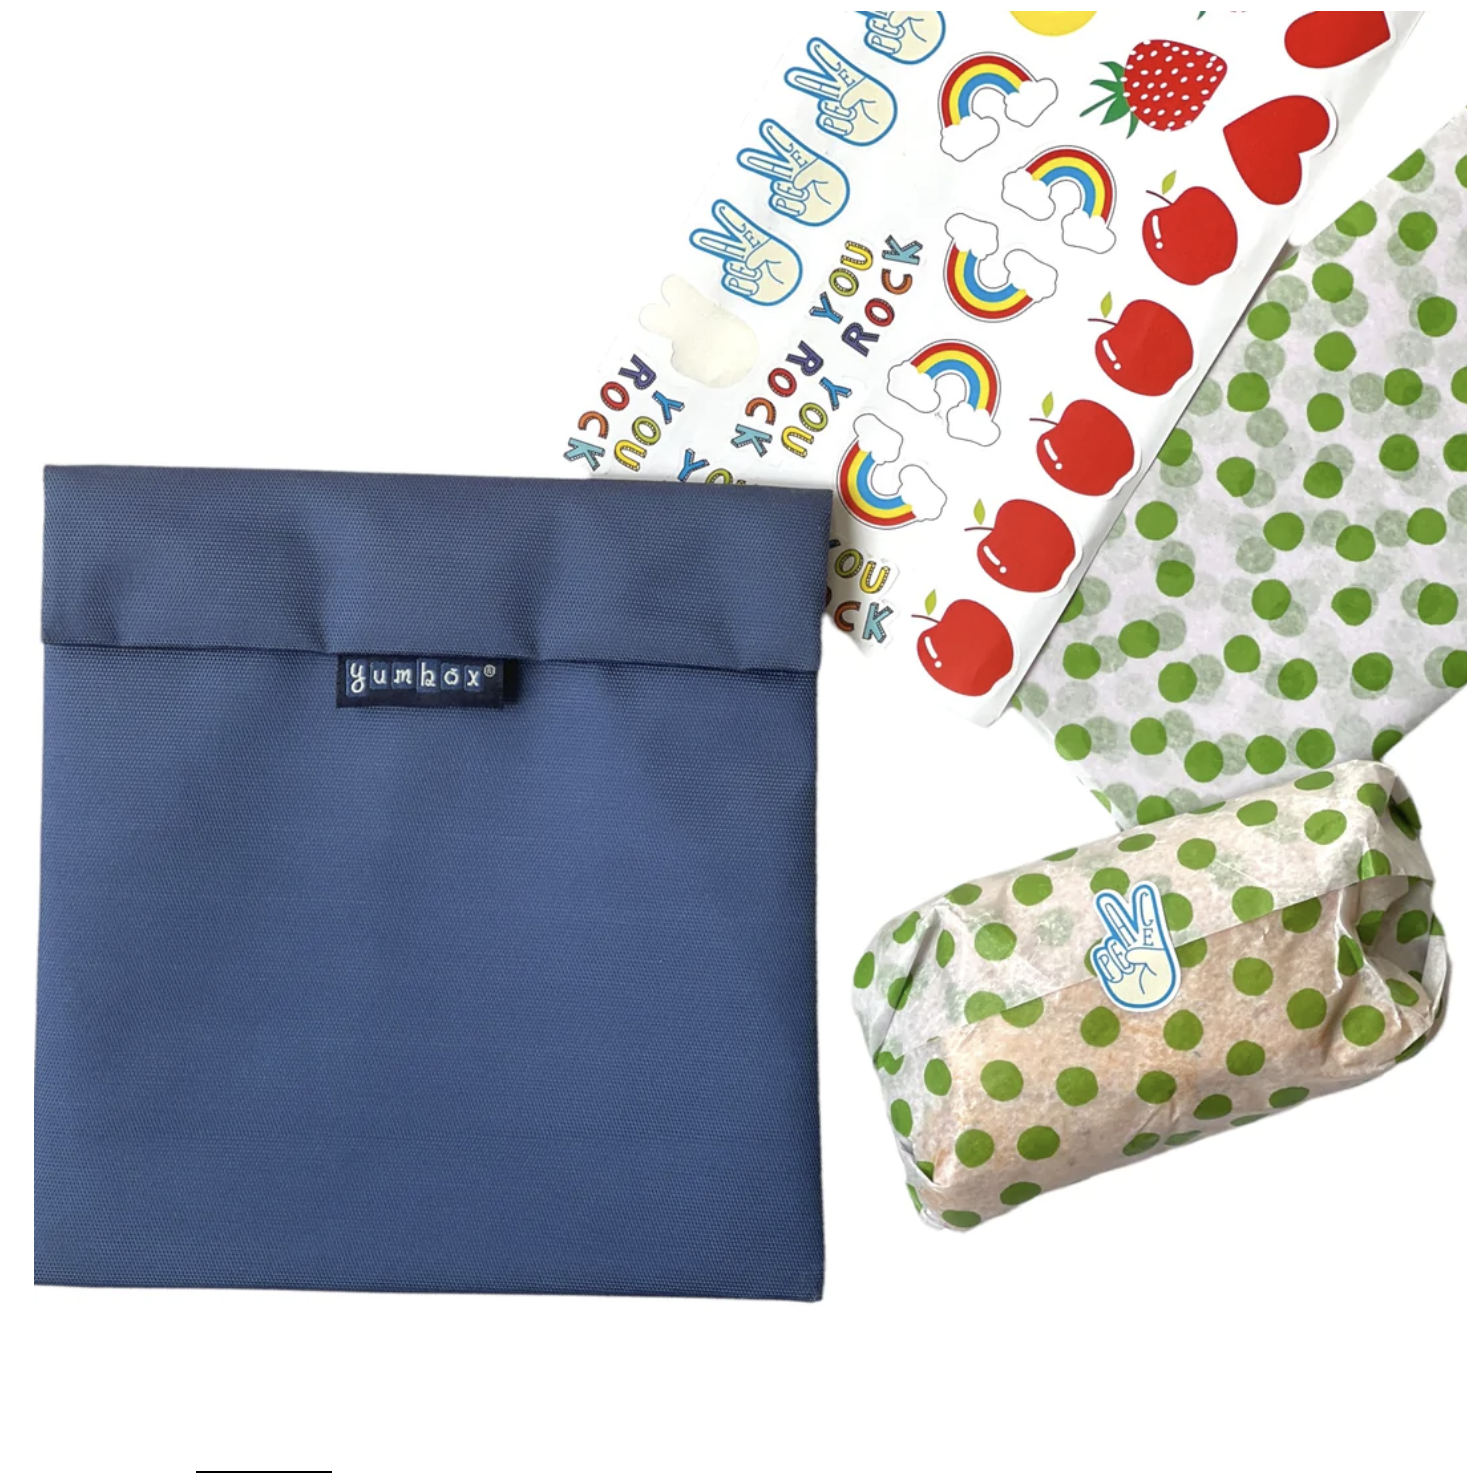 Sandwich wrapped in green dot paper with blue sandwich re-usable bag